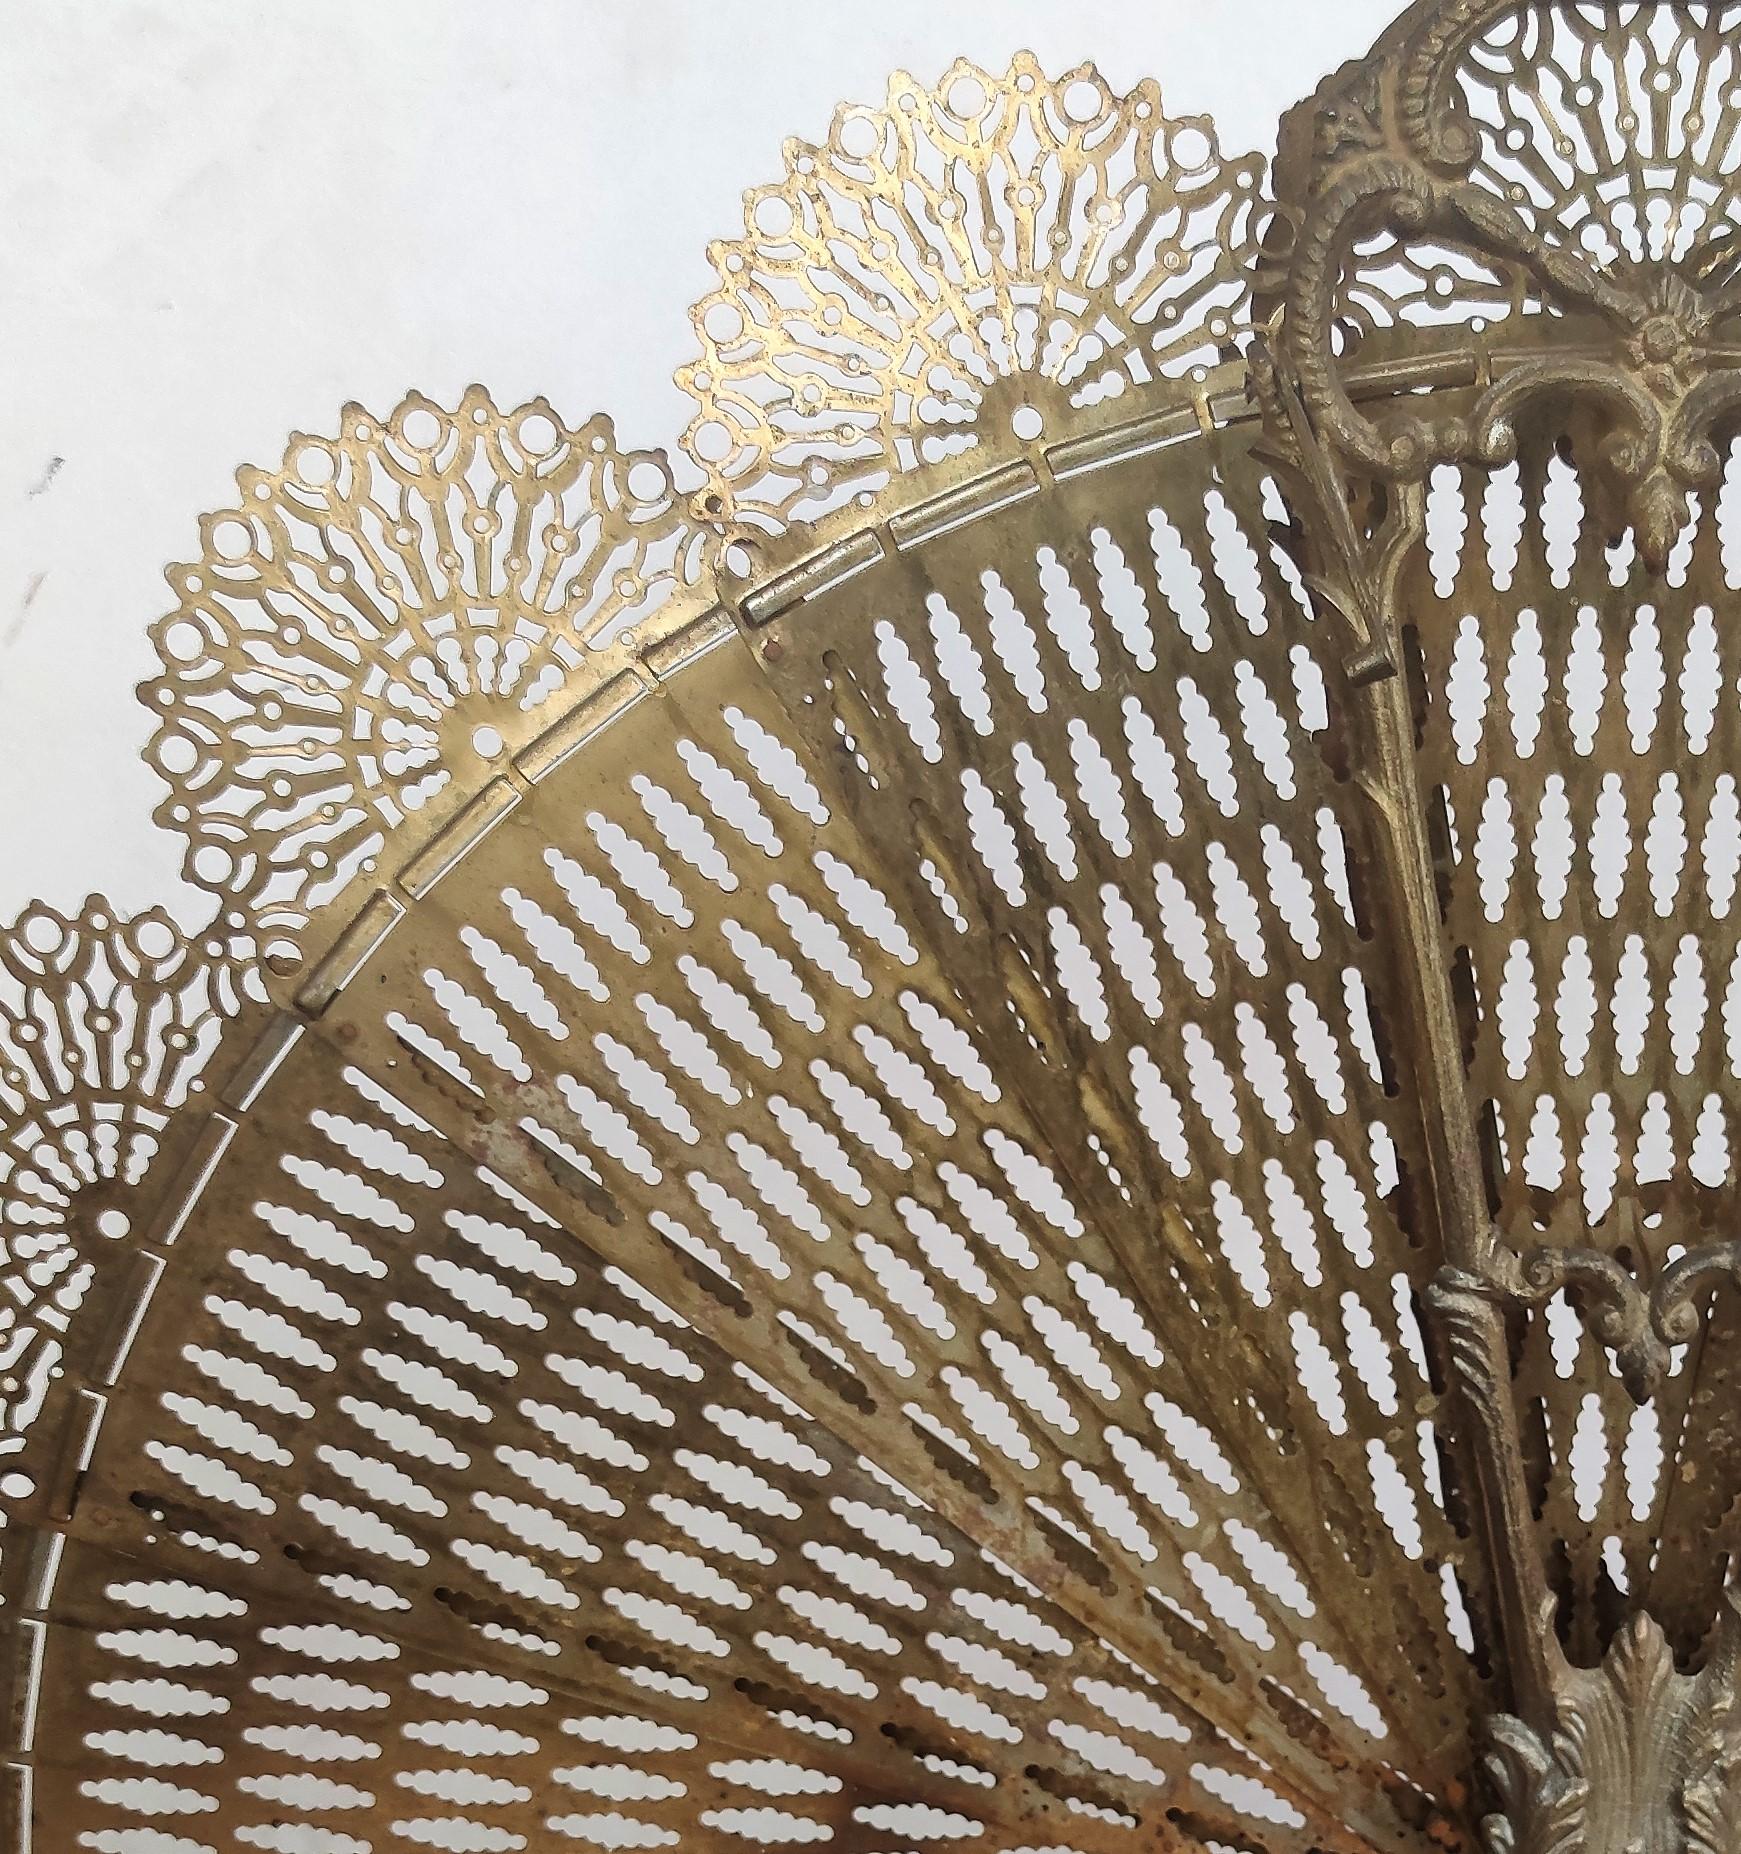 Italian gilt brass decorative pierced in a peacock fan design folding fire place fan screen 
with a foliage and berry handle, intertwined scrolled floral swags with a floral medallion, centered supporting bead work, and resting on a step back